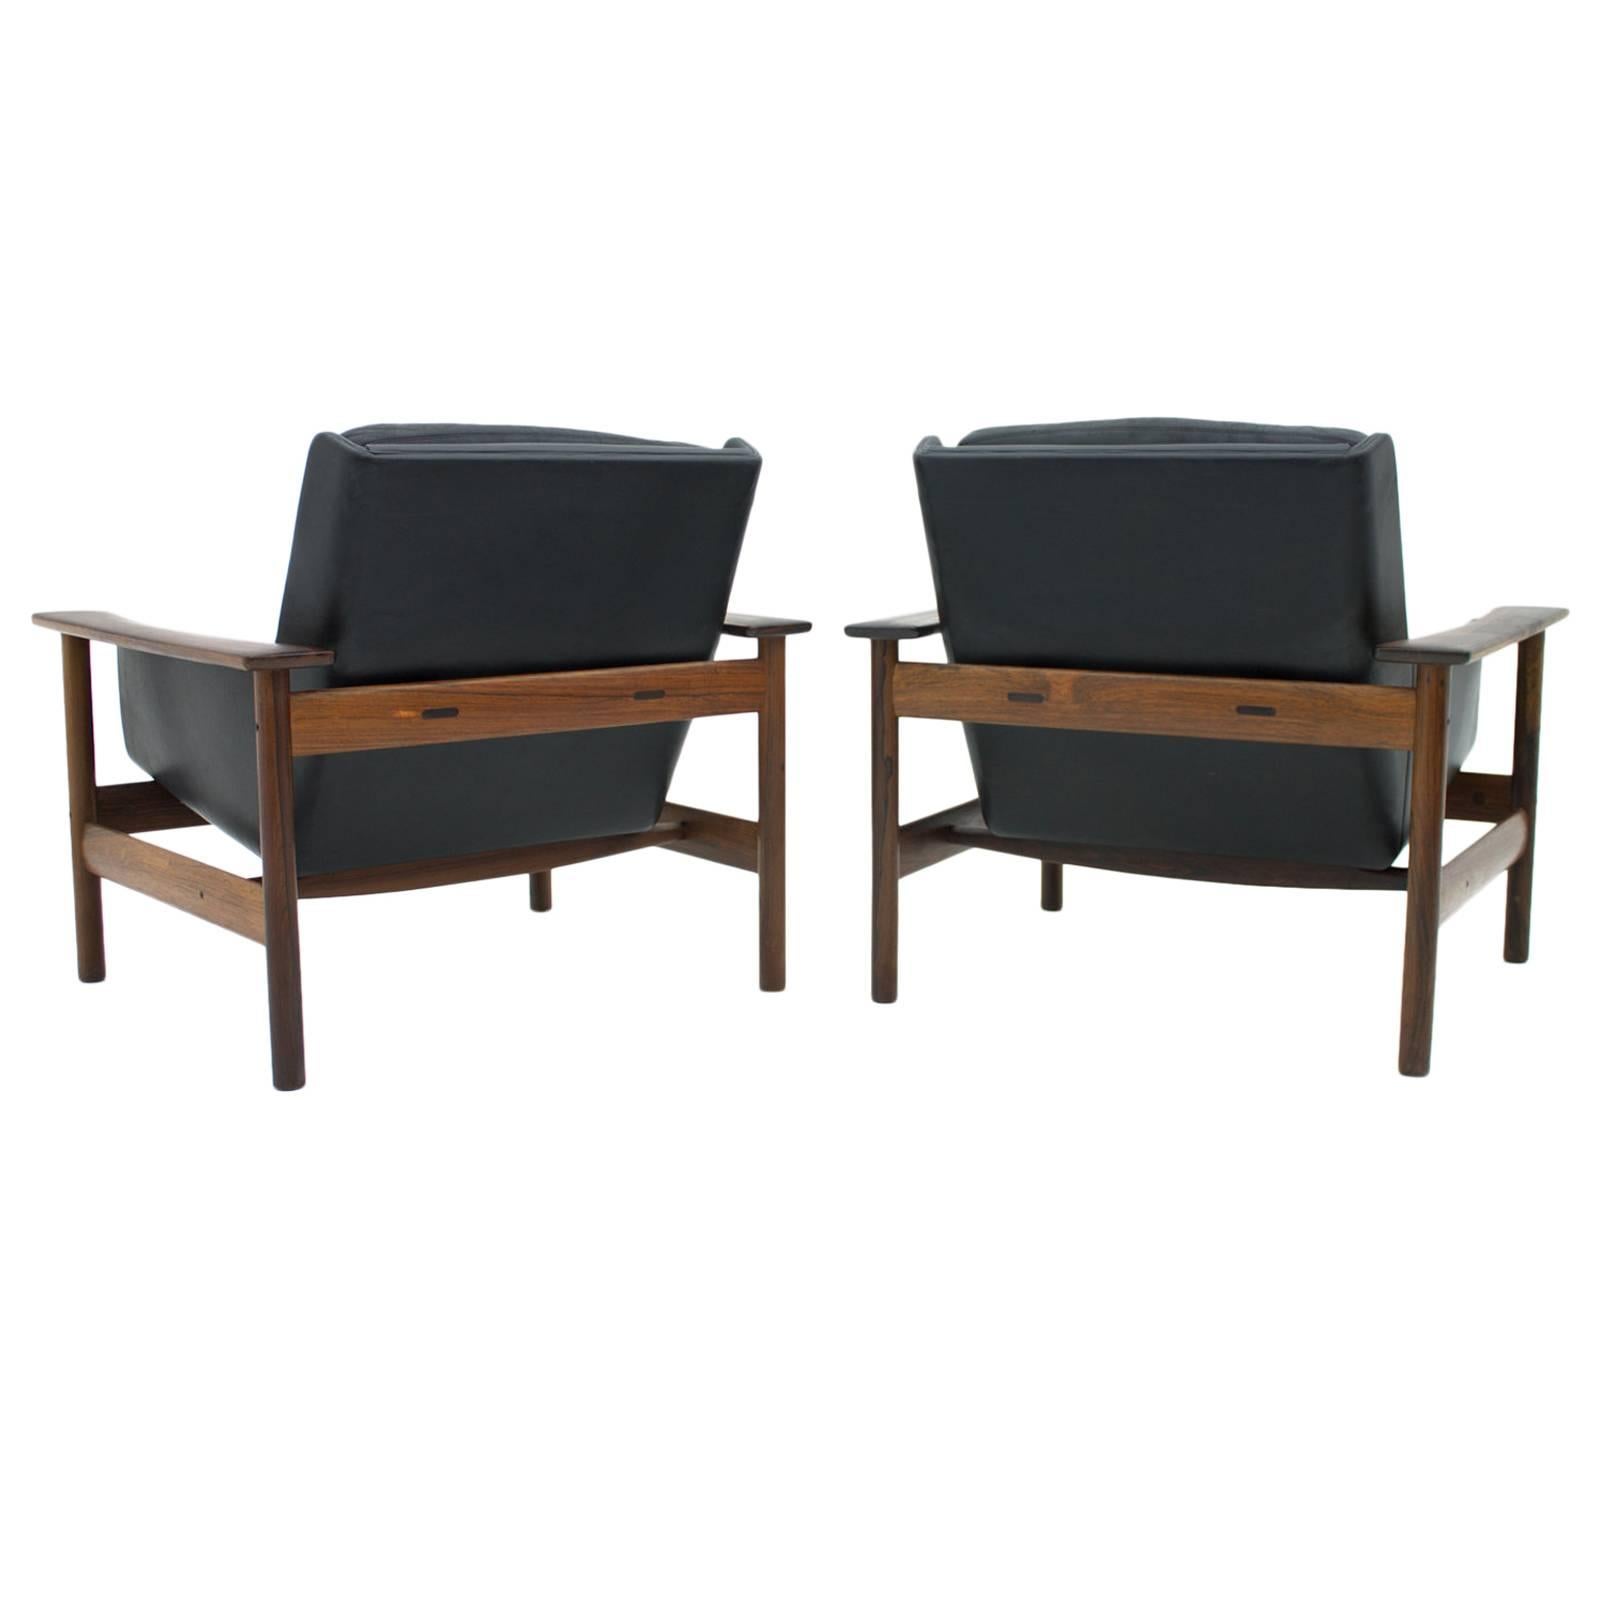 Pair of Rosewood and Leather Lounge Chairs by Sven Ivar Dysthe for Dokka